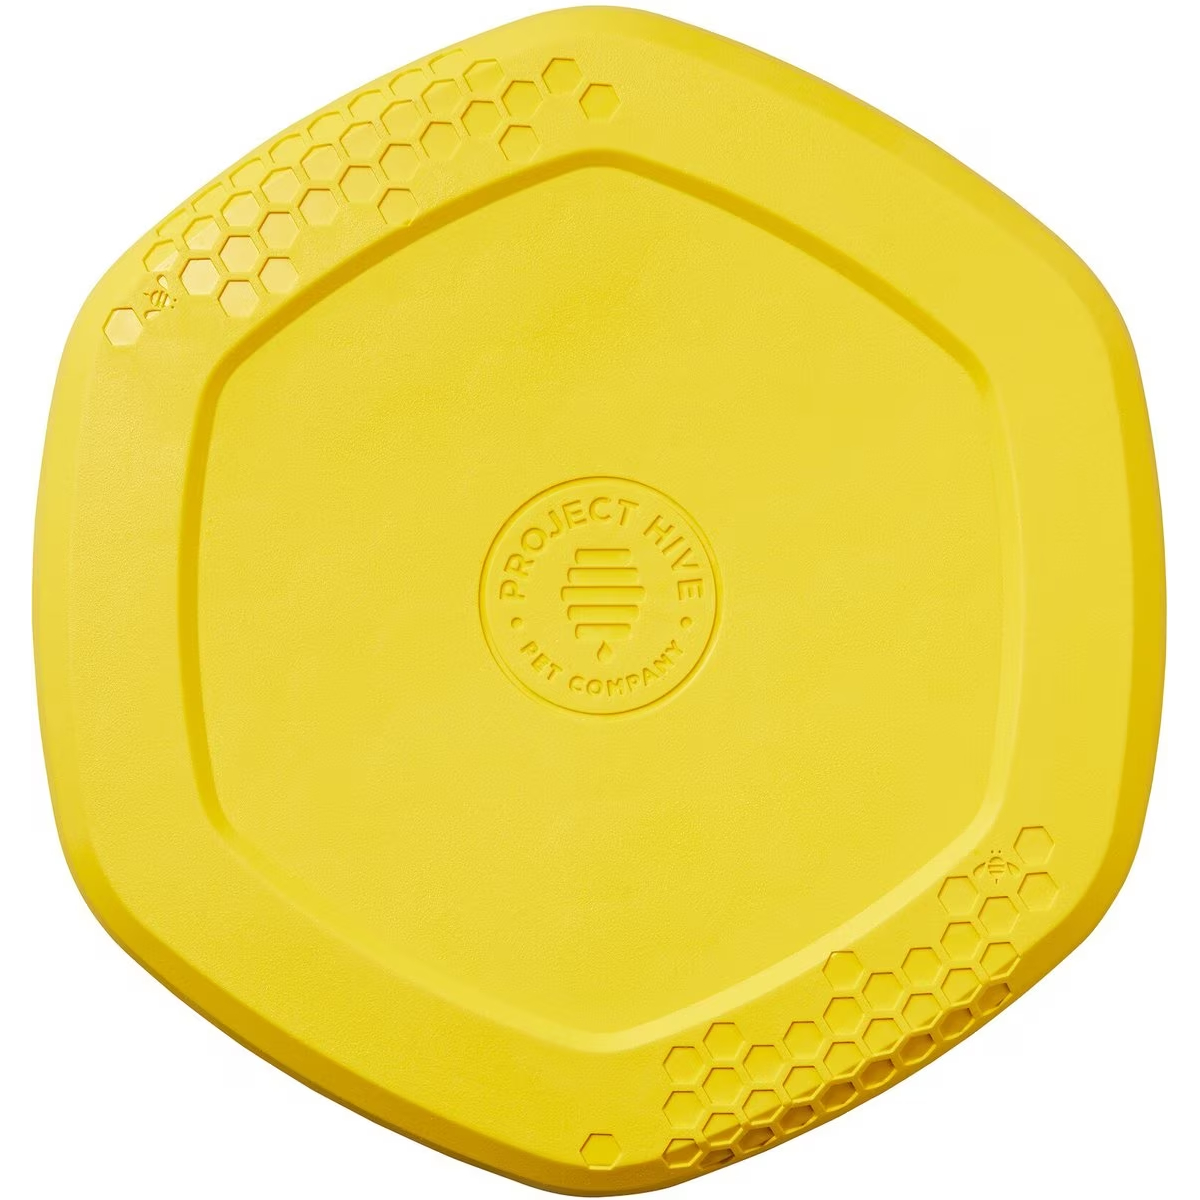 Project Hive Pet Company Frisbee Dog Toy